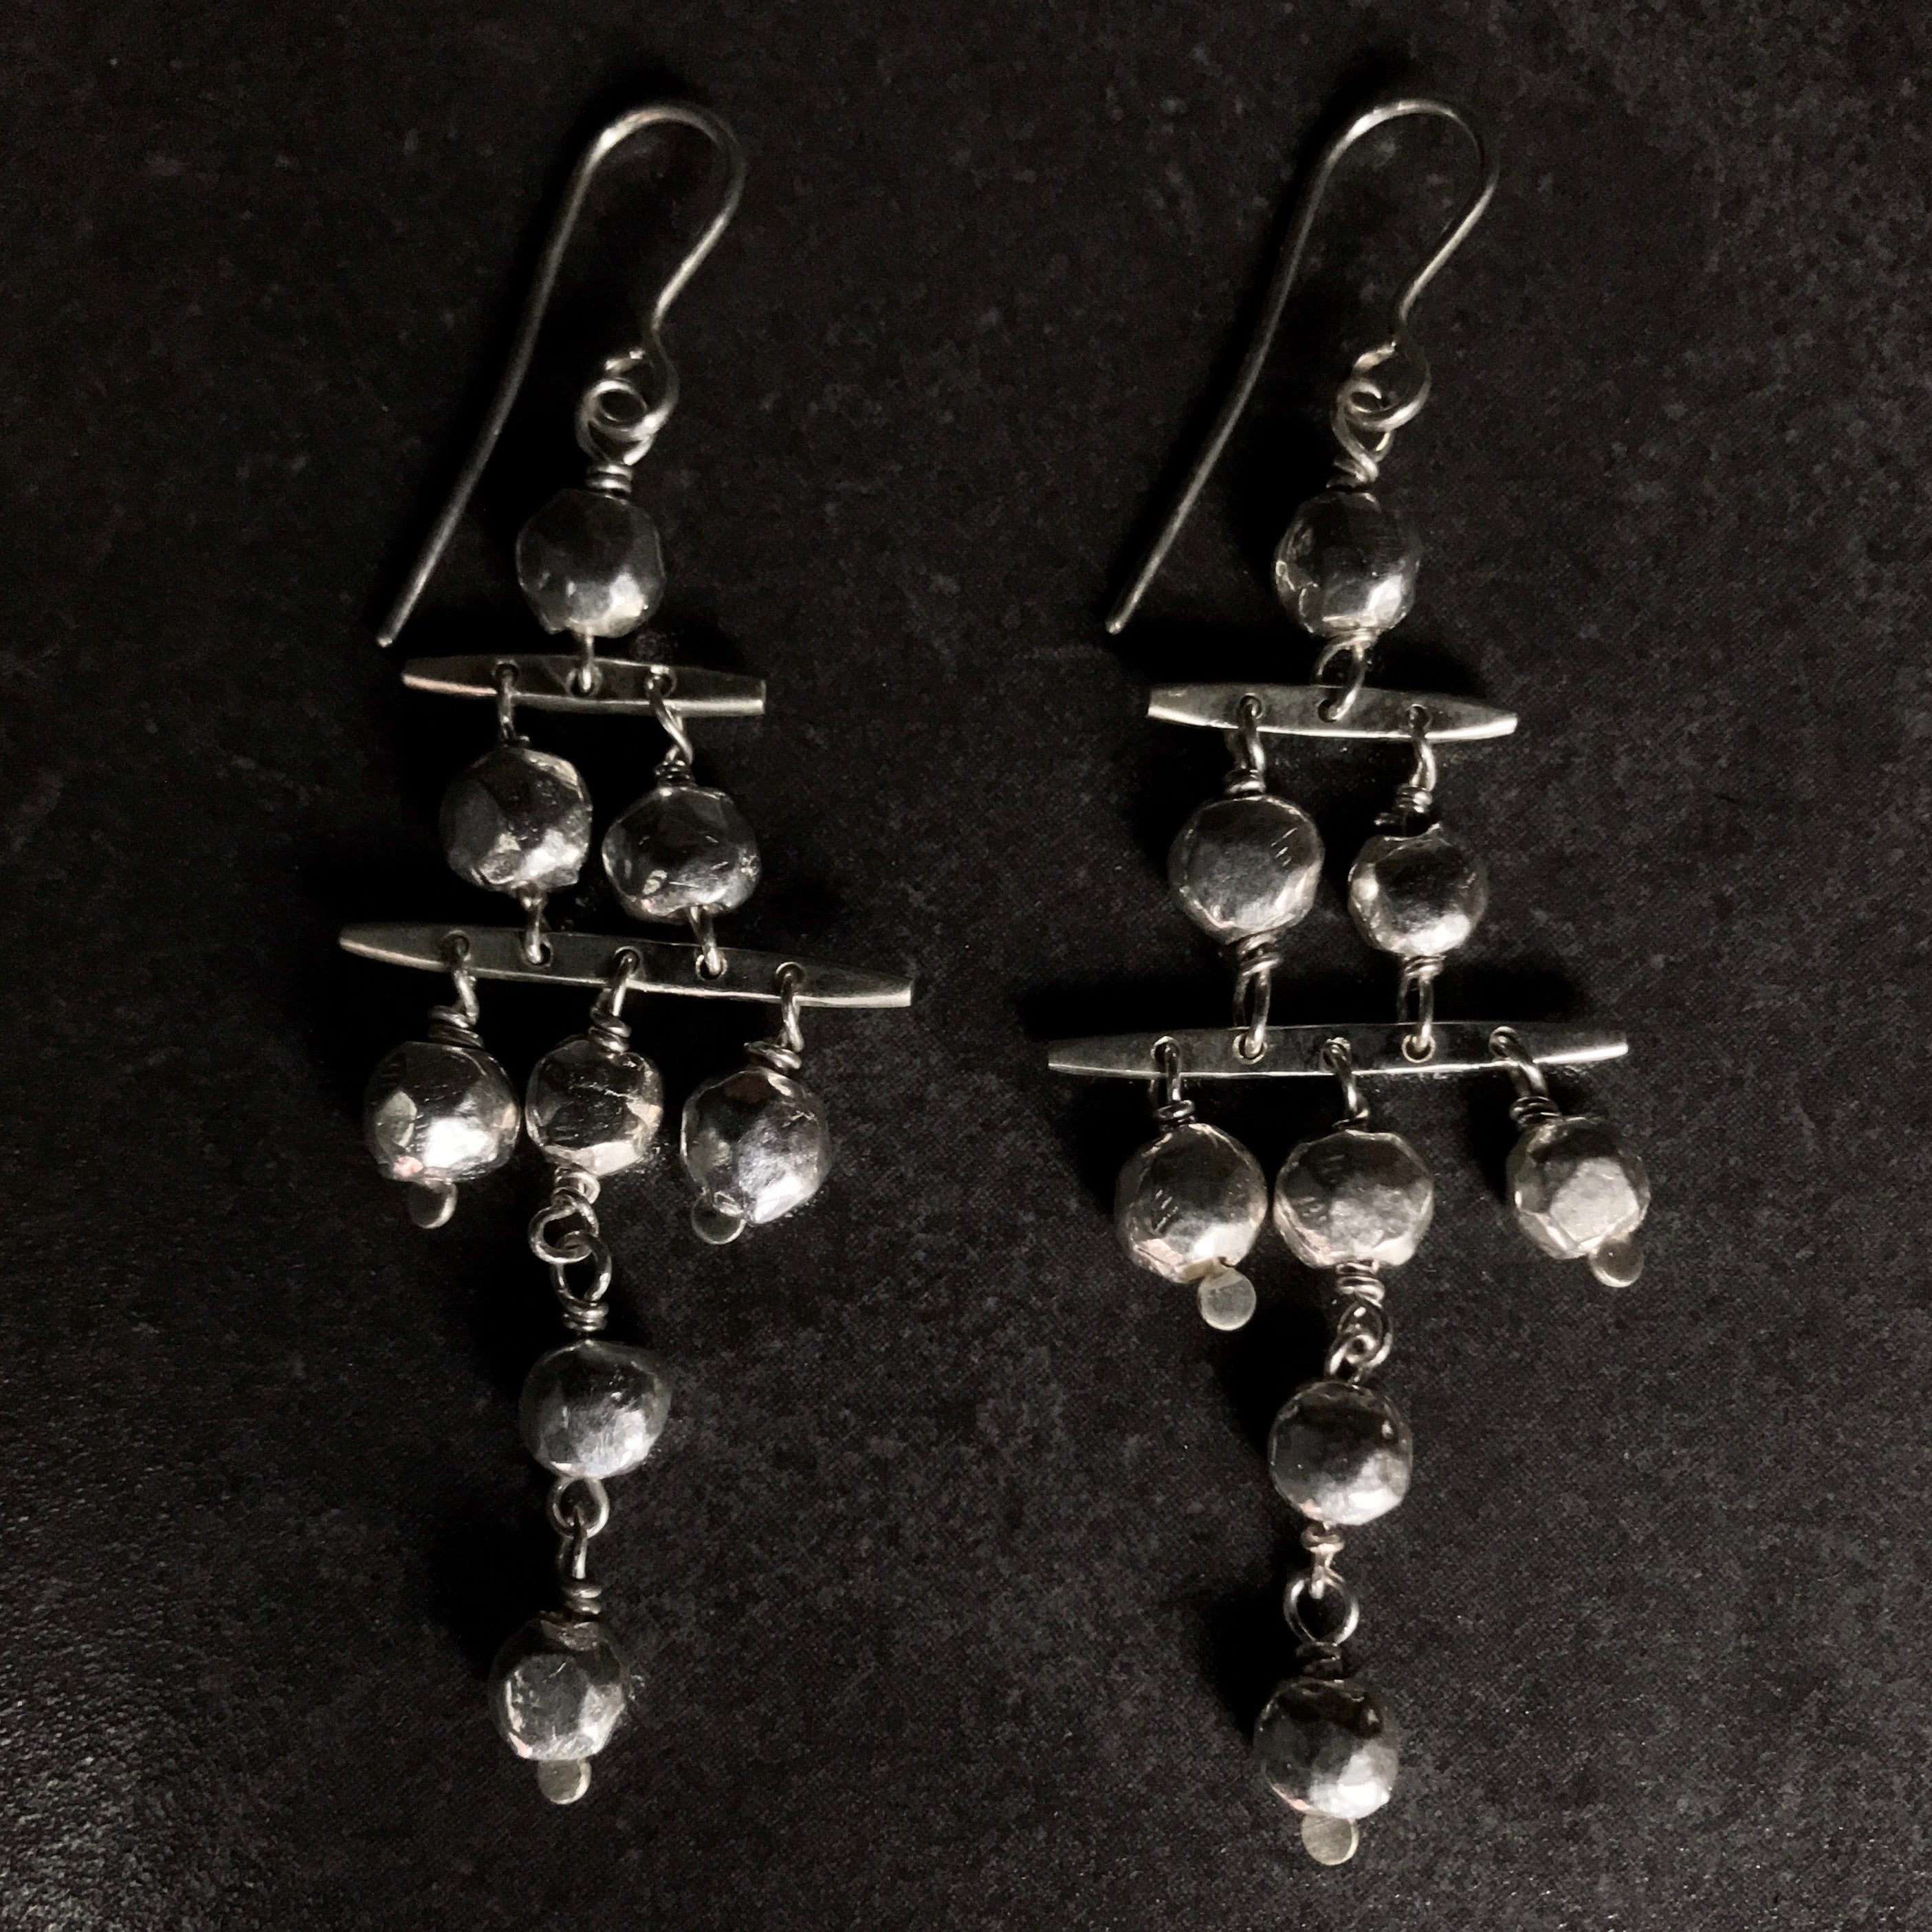 PICOLO0104 Chandelier Earrings  by herosisters - Luxury handmade silver jewelry and accessories